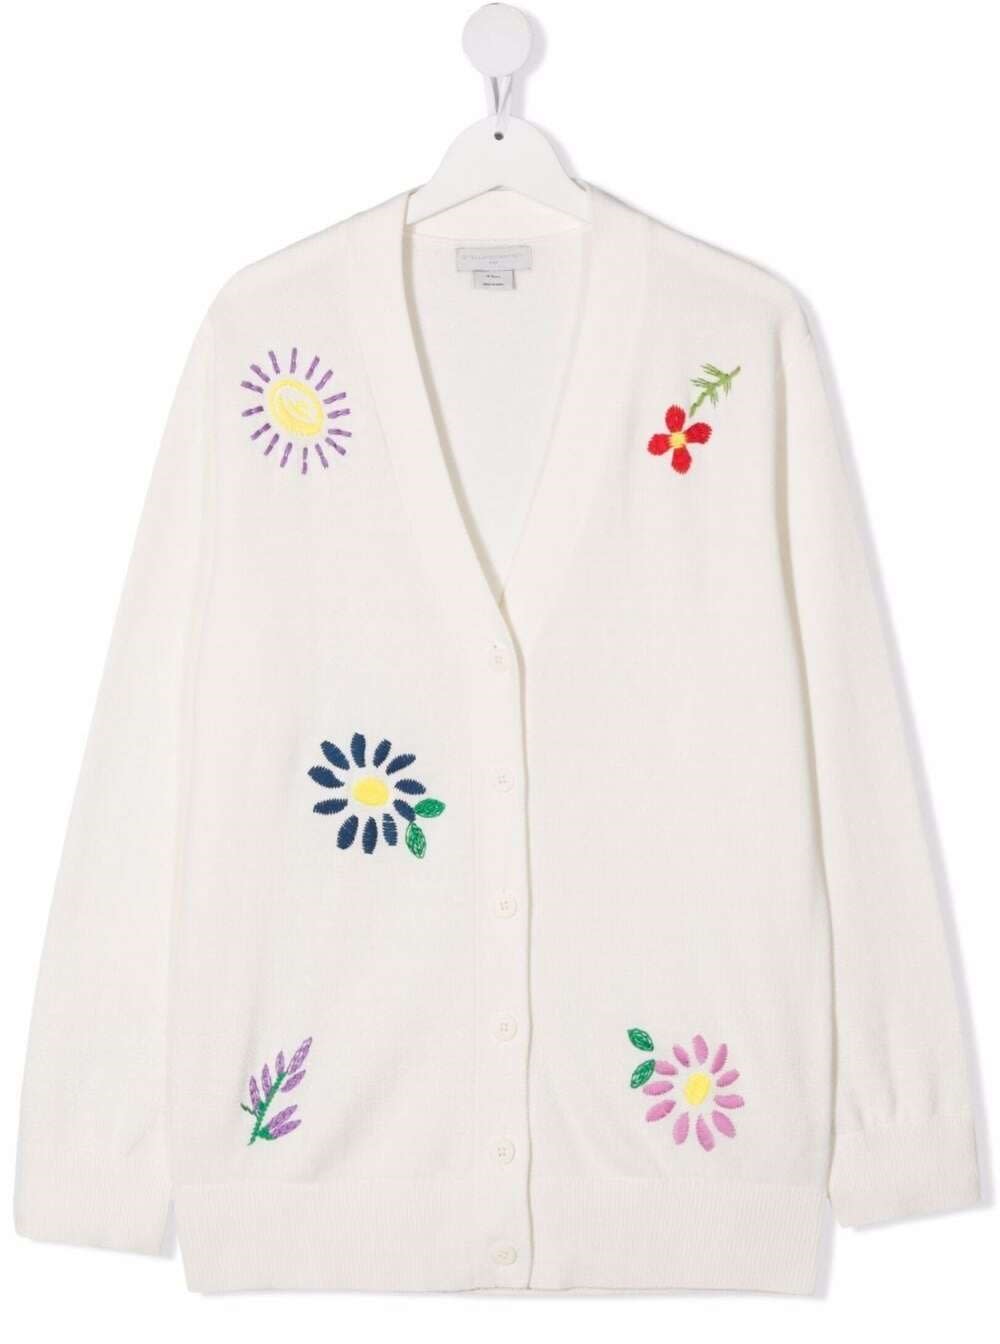 Stella McCartney Kids Cotton And Wool Cardigan With Floral Embroidery